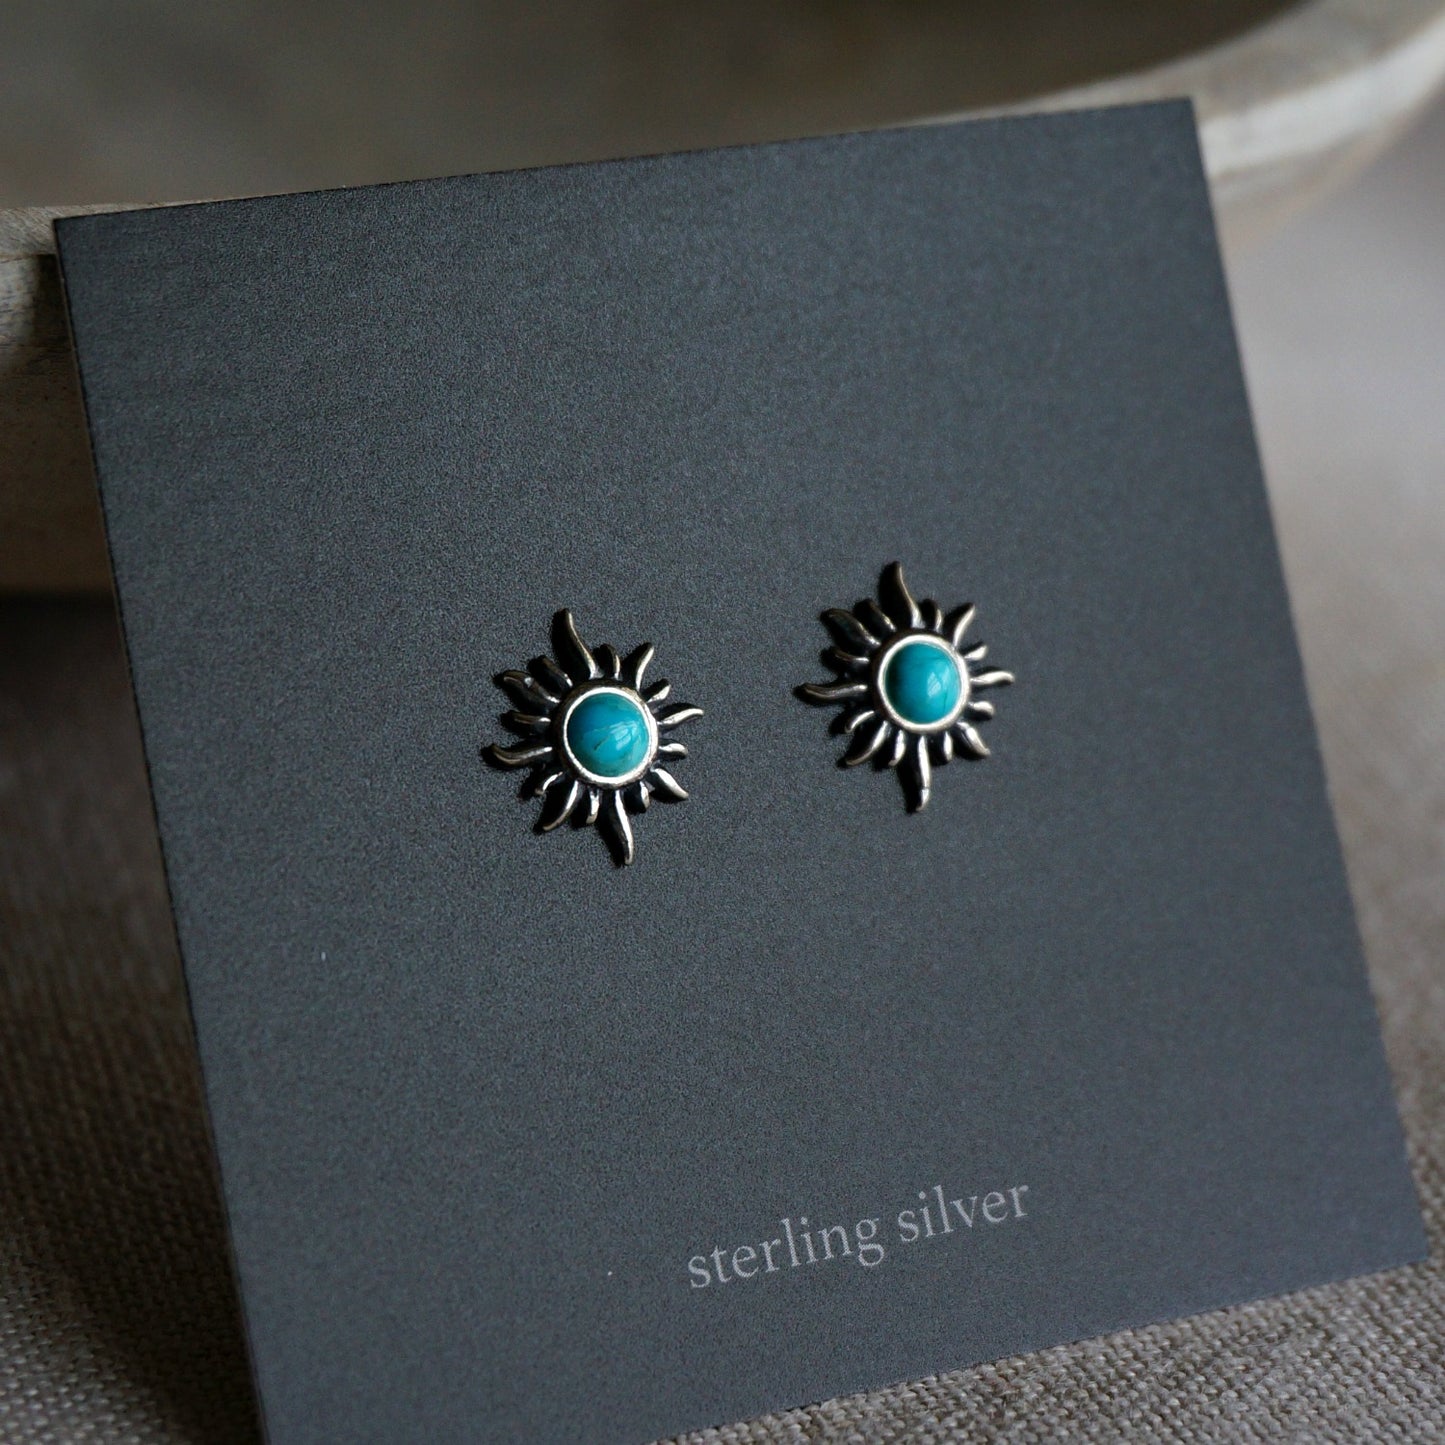 Sunburst Turquoise Earrings - Sterling Silver - Moon Room Shop and Wellness